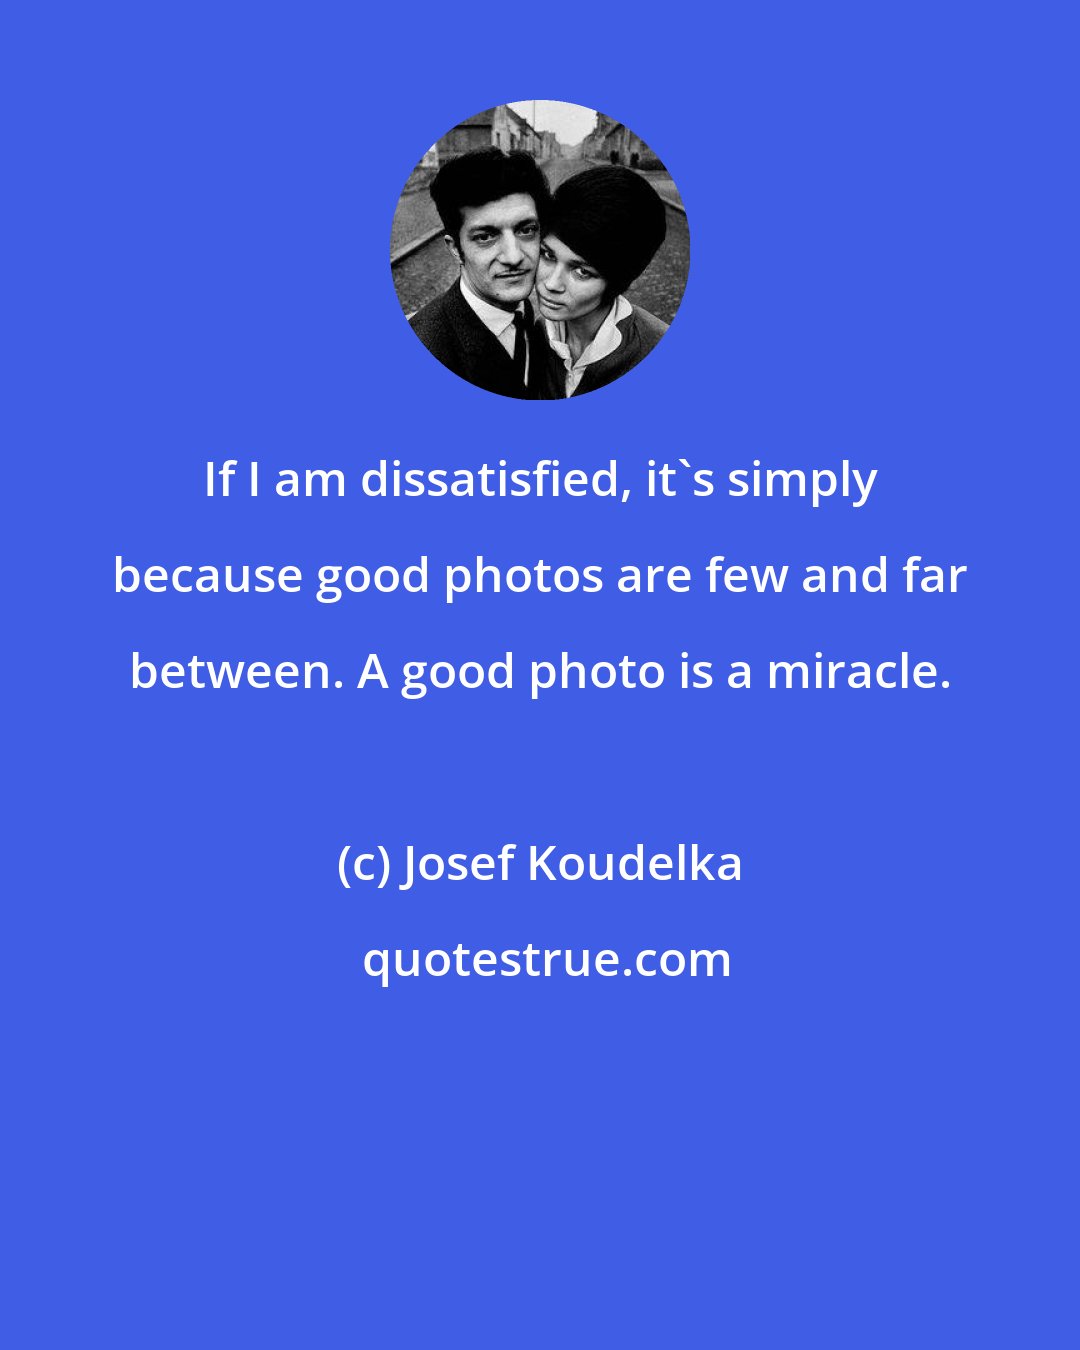 Josef Koudelka: If I am dissatisfied, it's simply because good photos are few and far between. A good photo is a miracle.